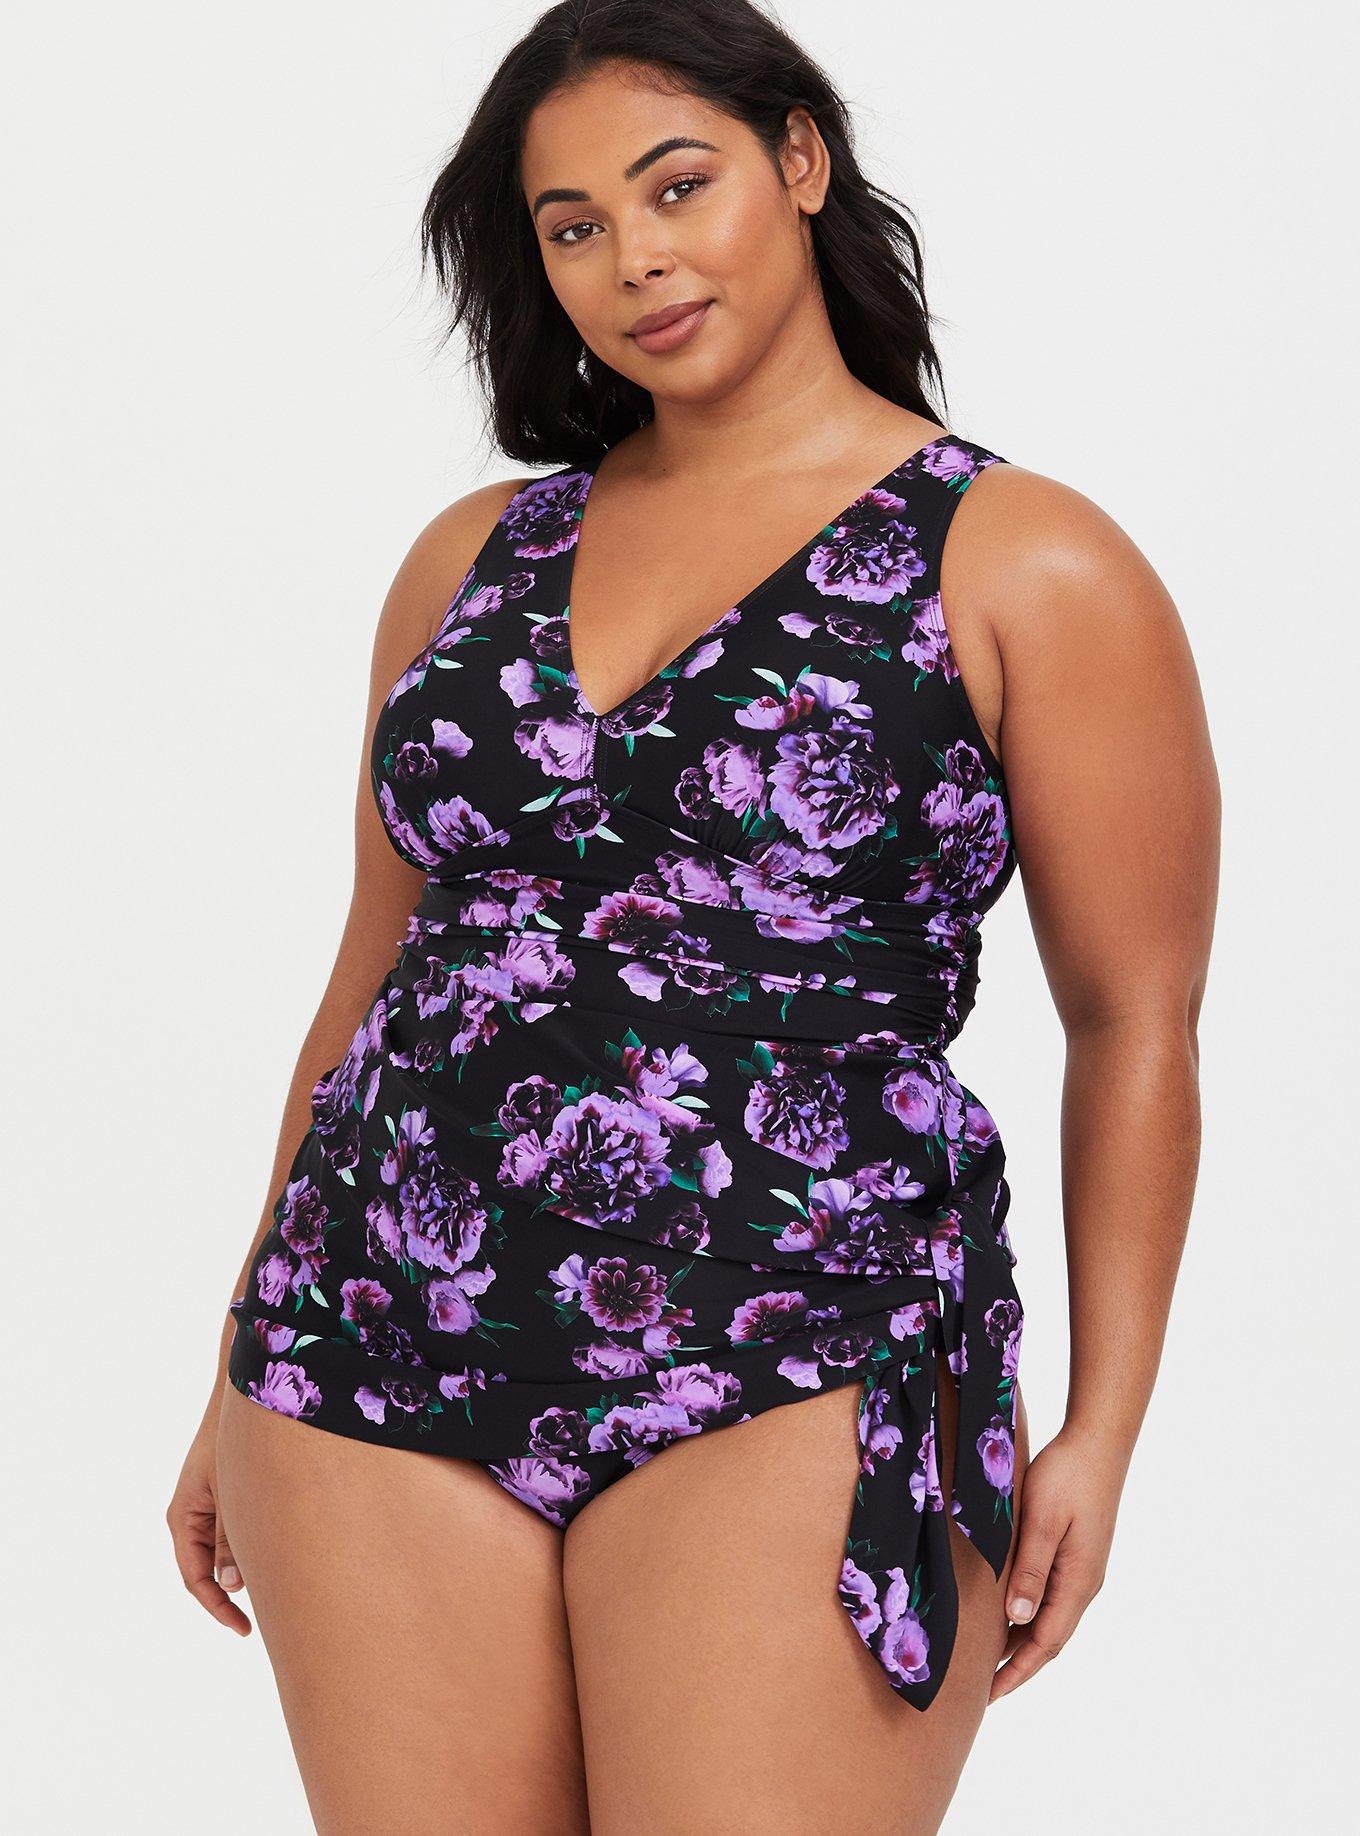 Indie XO About to Blossom Floral Pattern Bustier Bodysuit Top